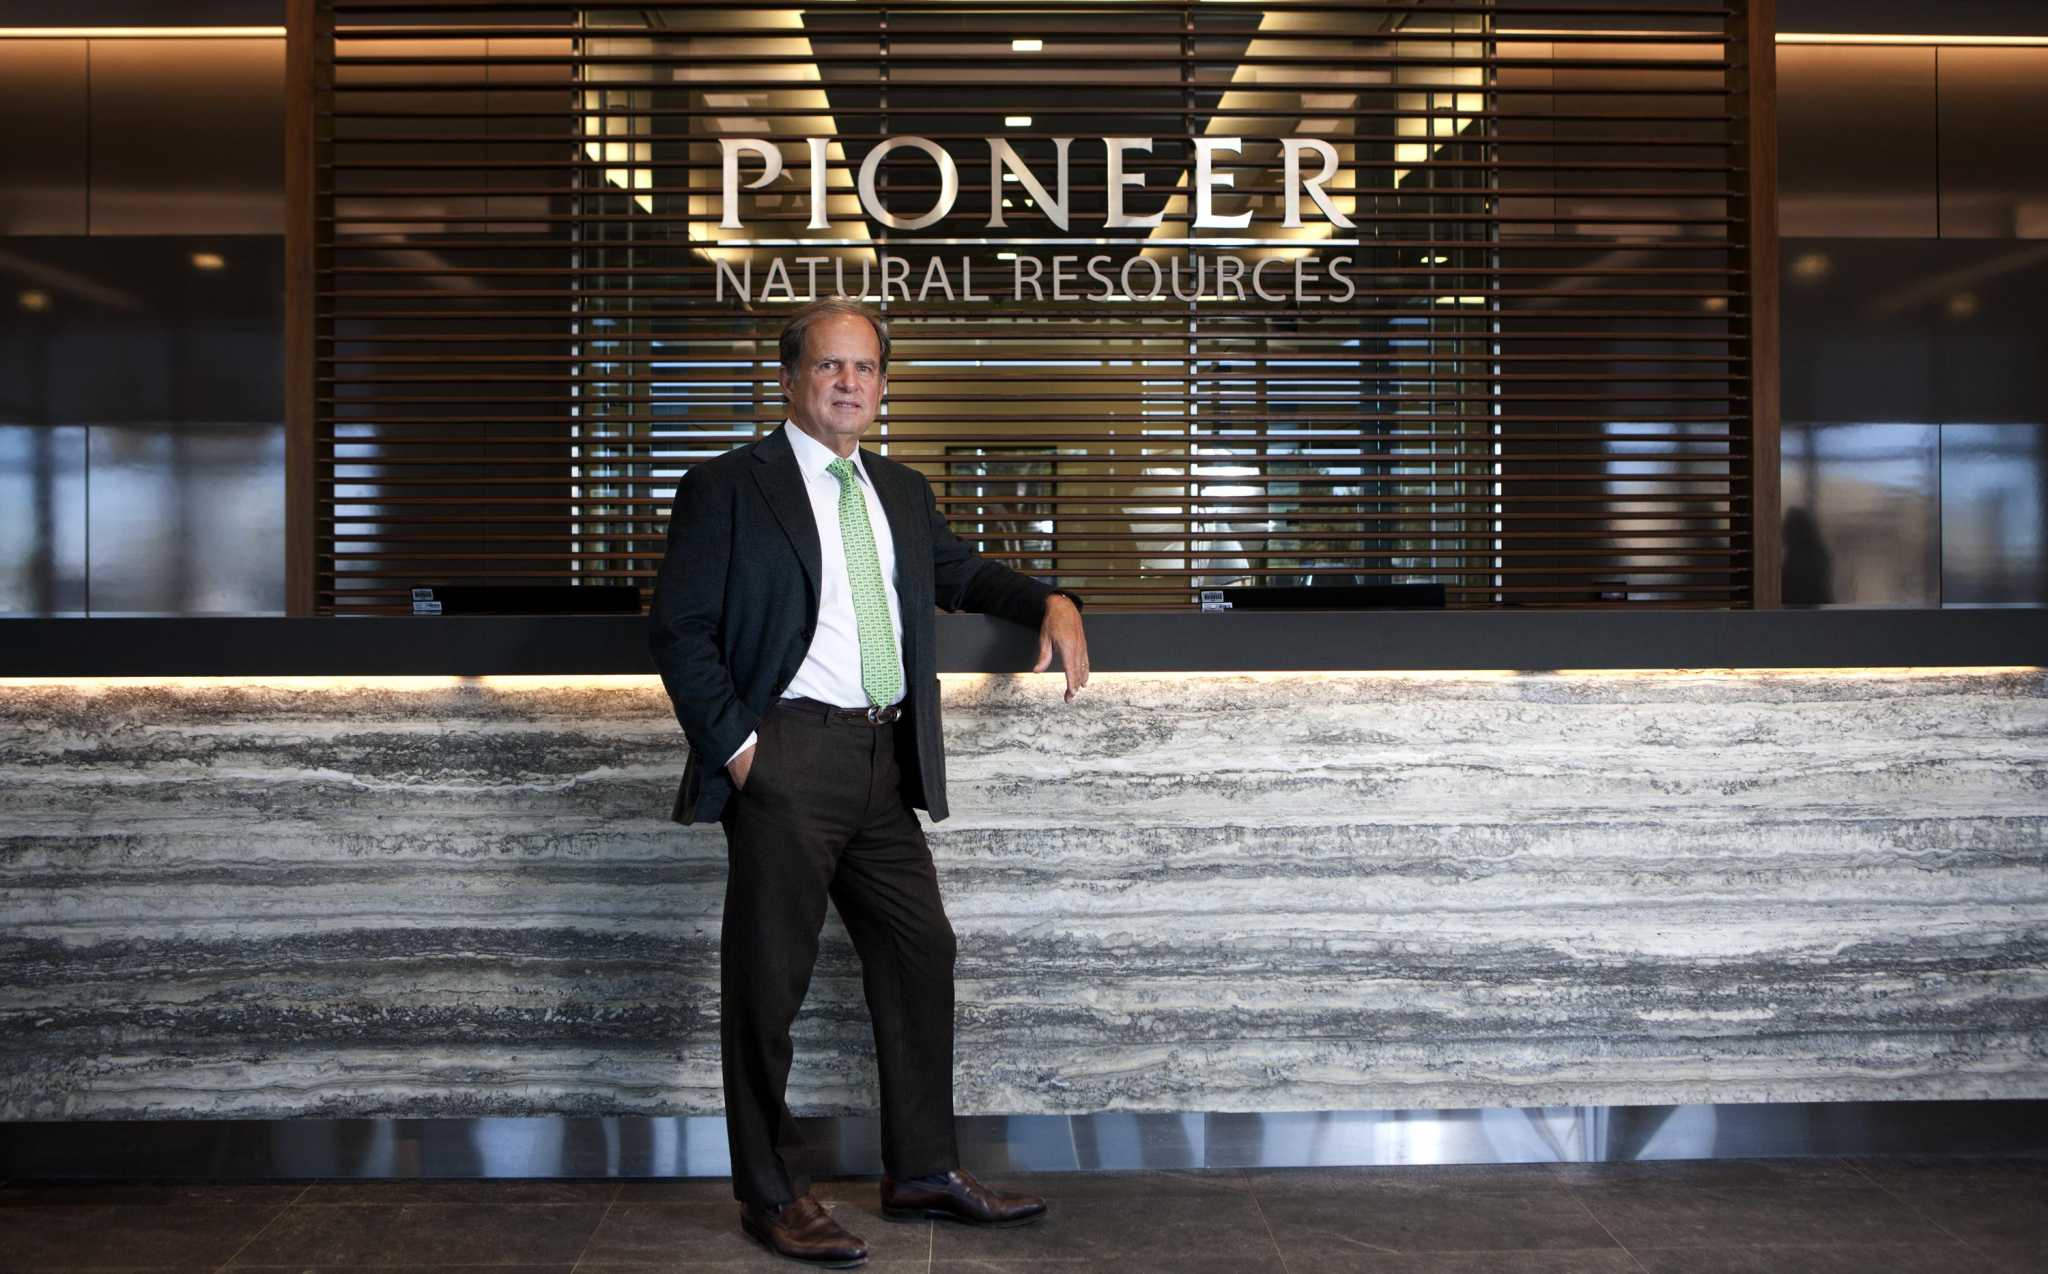 Pioneer Natural Resources to acquire Parsley Energy in $4.5B deal - Houston Chronicle